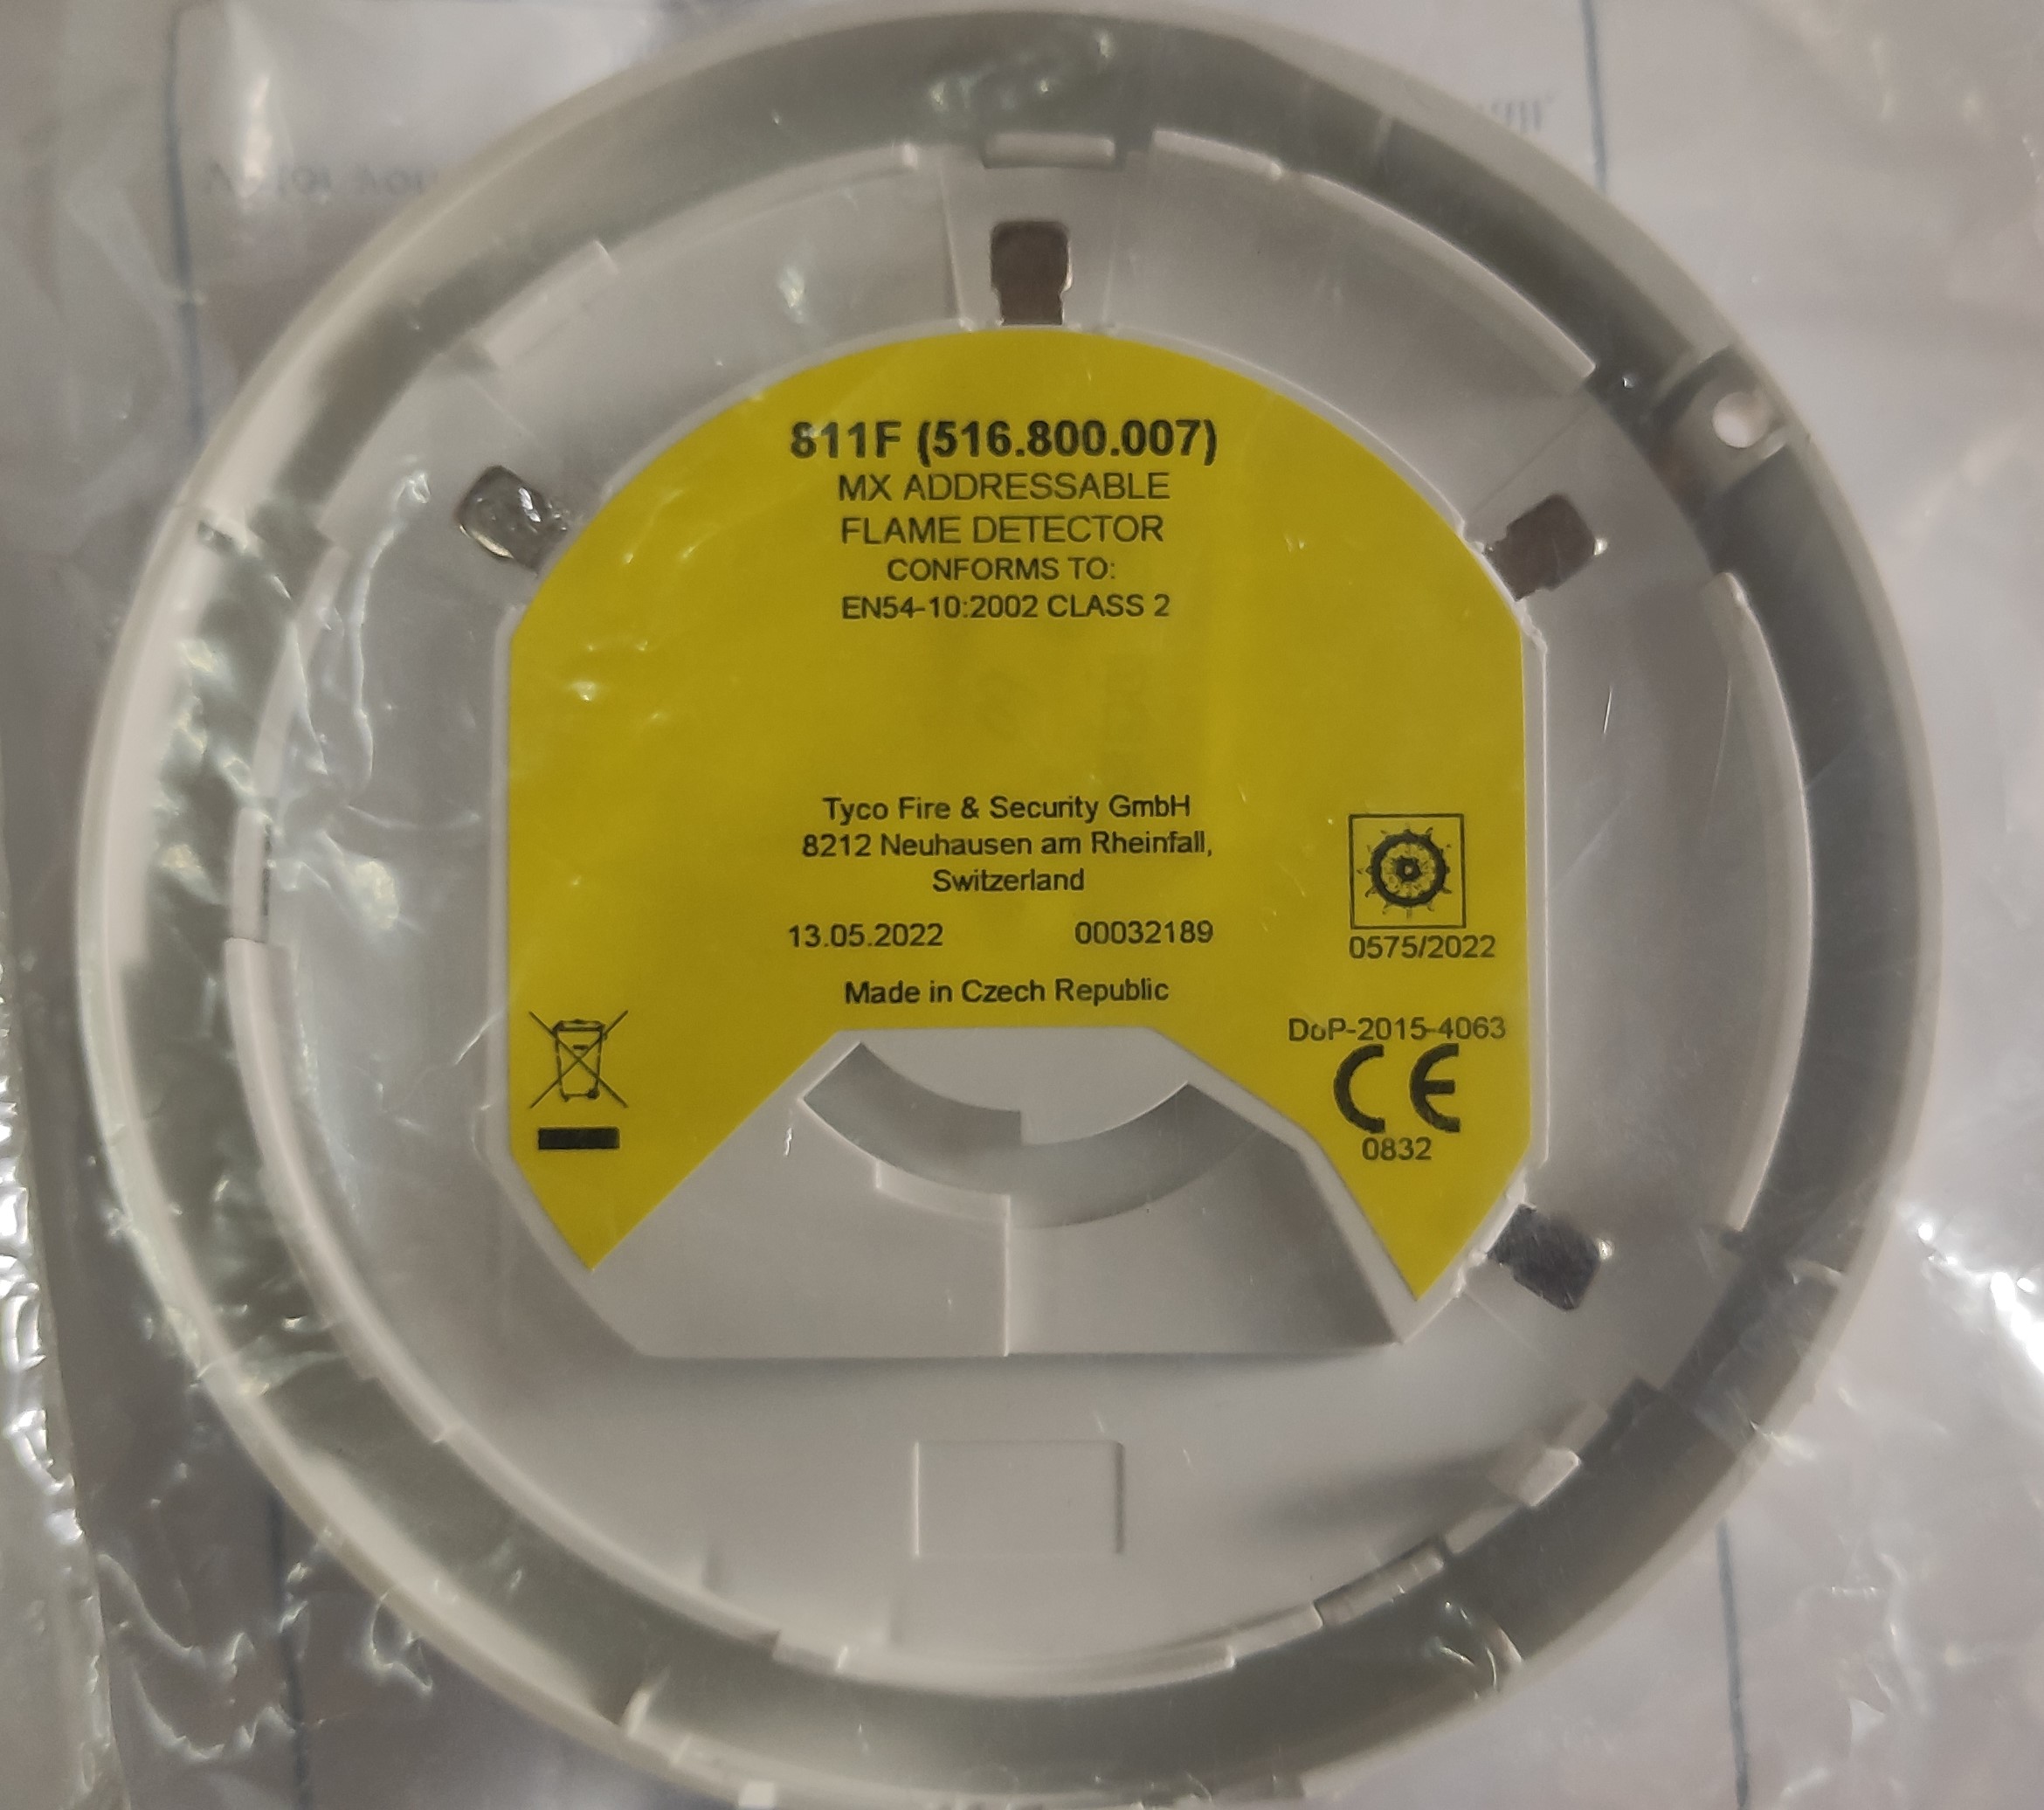 516.800.007 (811F) ADDRESSABLE FLAME DETECTOR 